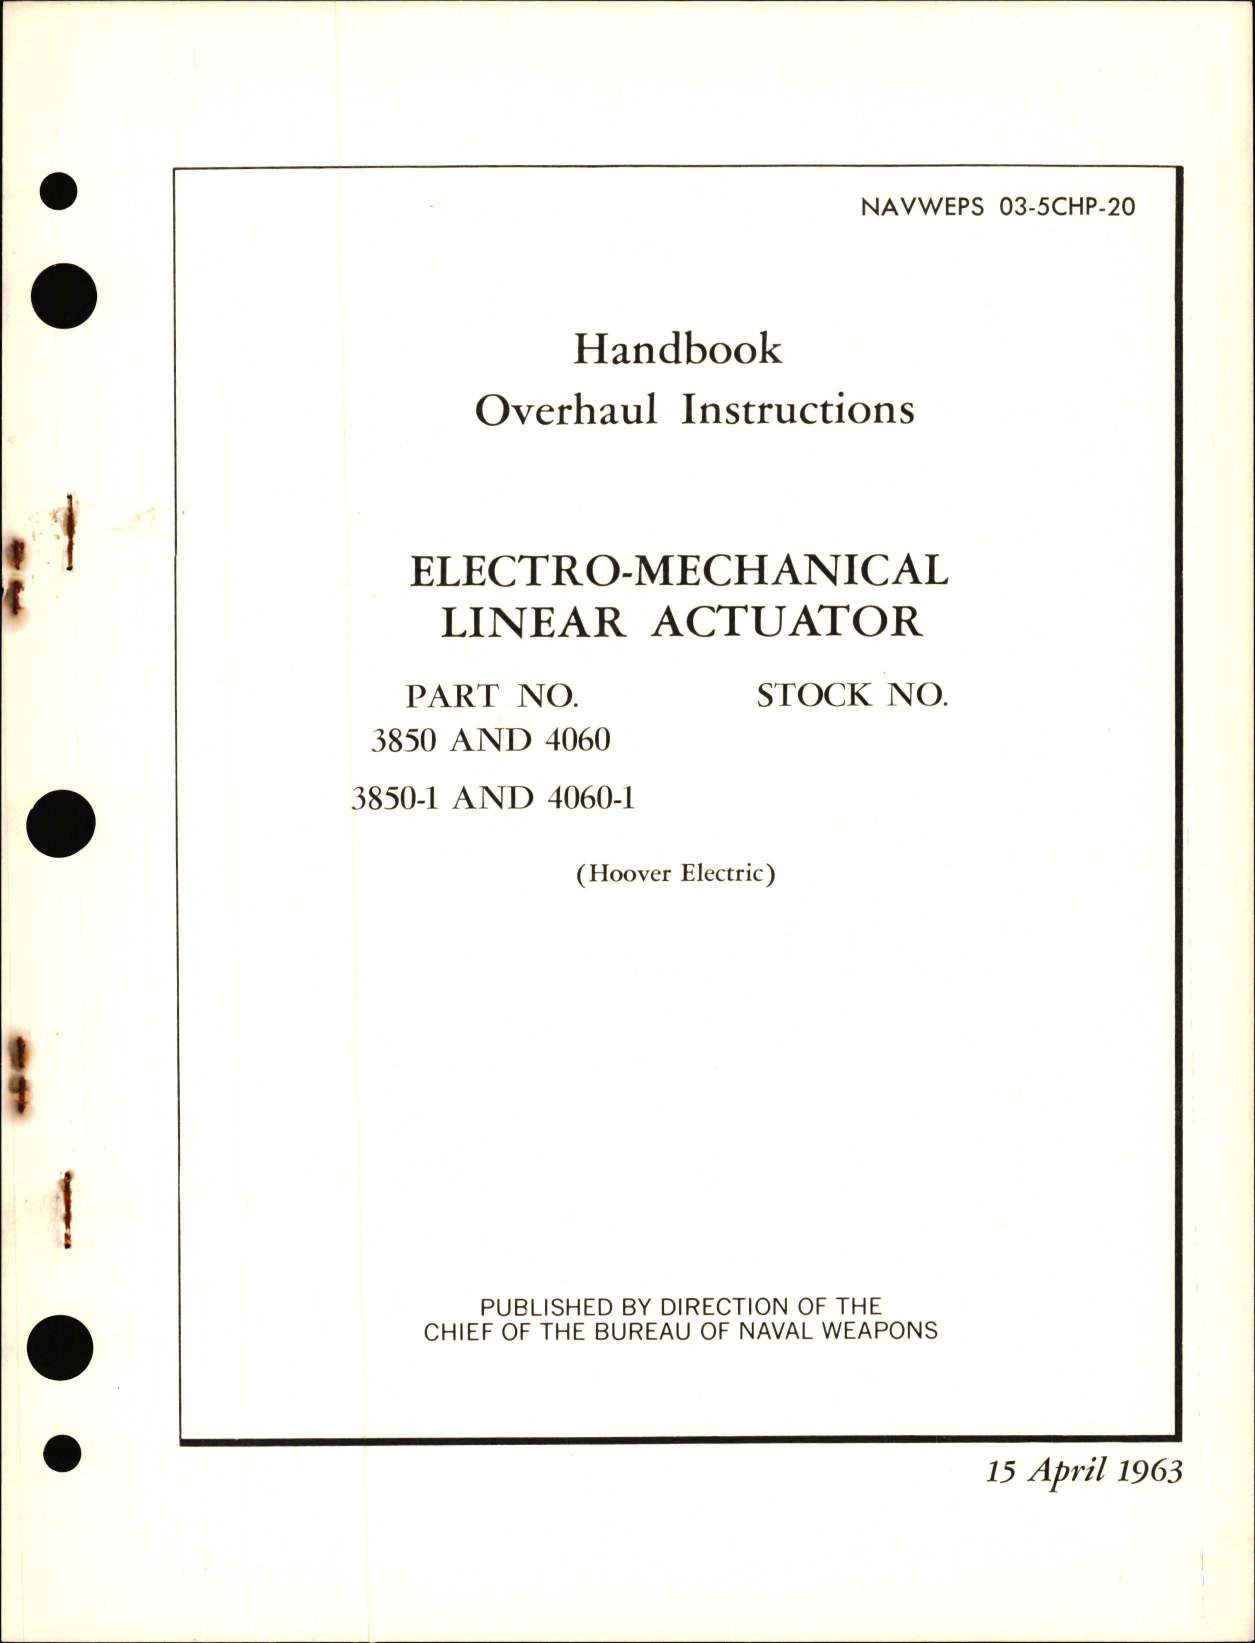 Sample page 1 from AirCorps Library document: Overhaul Instructions for Electro-Mechanical Linear Actuator 3850, 3850-1, 4060, and 4060-1